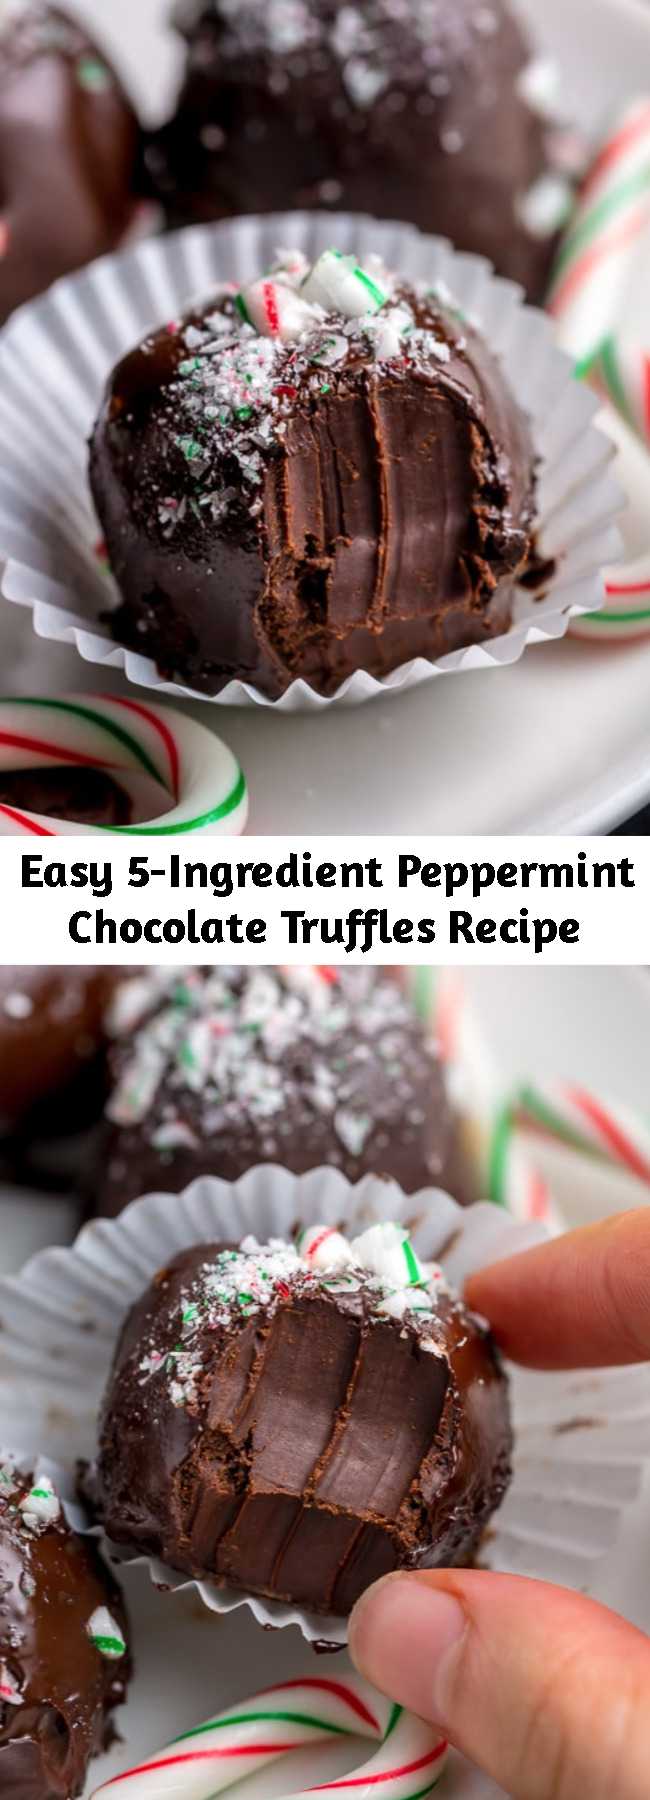 Easy 5-Ingredient Peppermint Chocolate Truffles Recipe - Rich and Creamy Peppermint Chocolate Truffles are made with just 5 simple ingredients! These homemade truffles are so easy and perfect for homemade holiday gifts! Use dark chocolate or white chocolate!